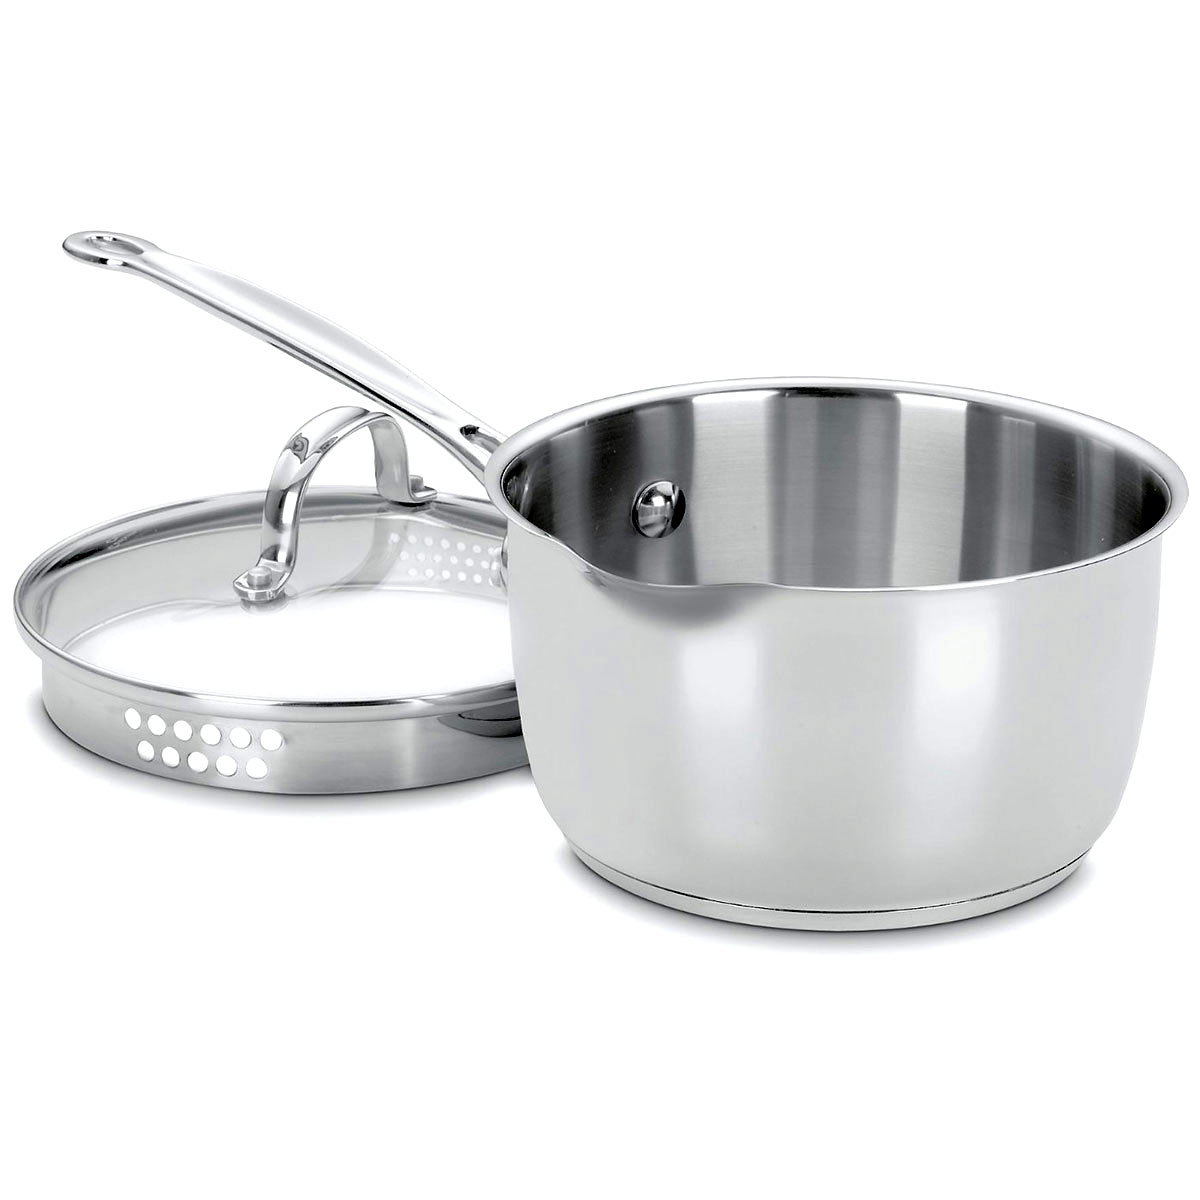 Cuisinart Chefs Classic Stainless 2 Qt. Cook and Pour Saucepan w/Cover Cuisinart Chef's Classic Stainless Steel 2 Qt. Saucepan With Lid